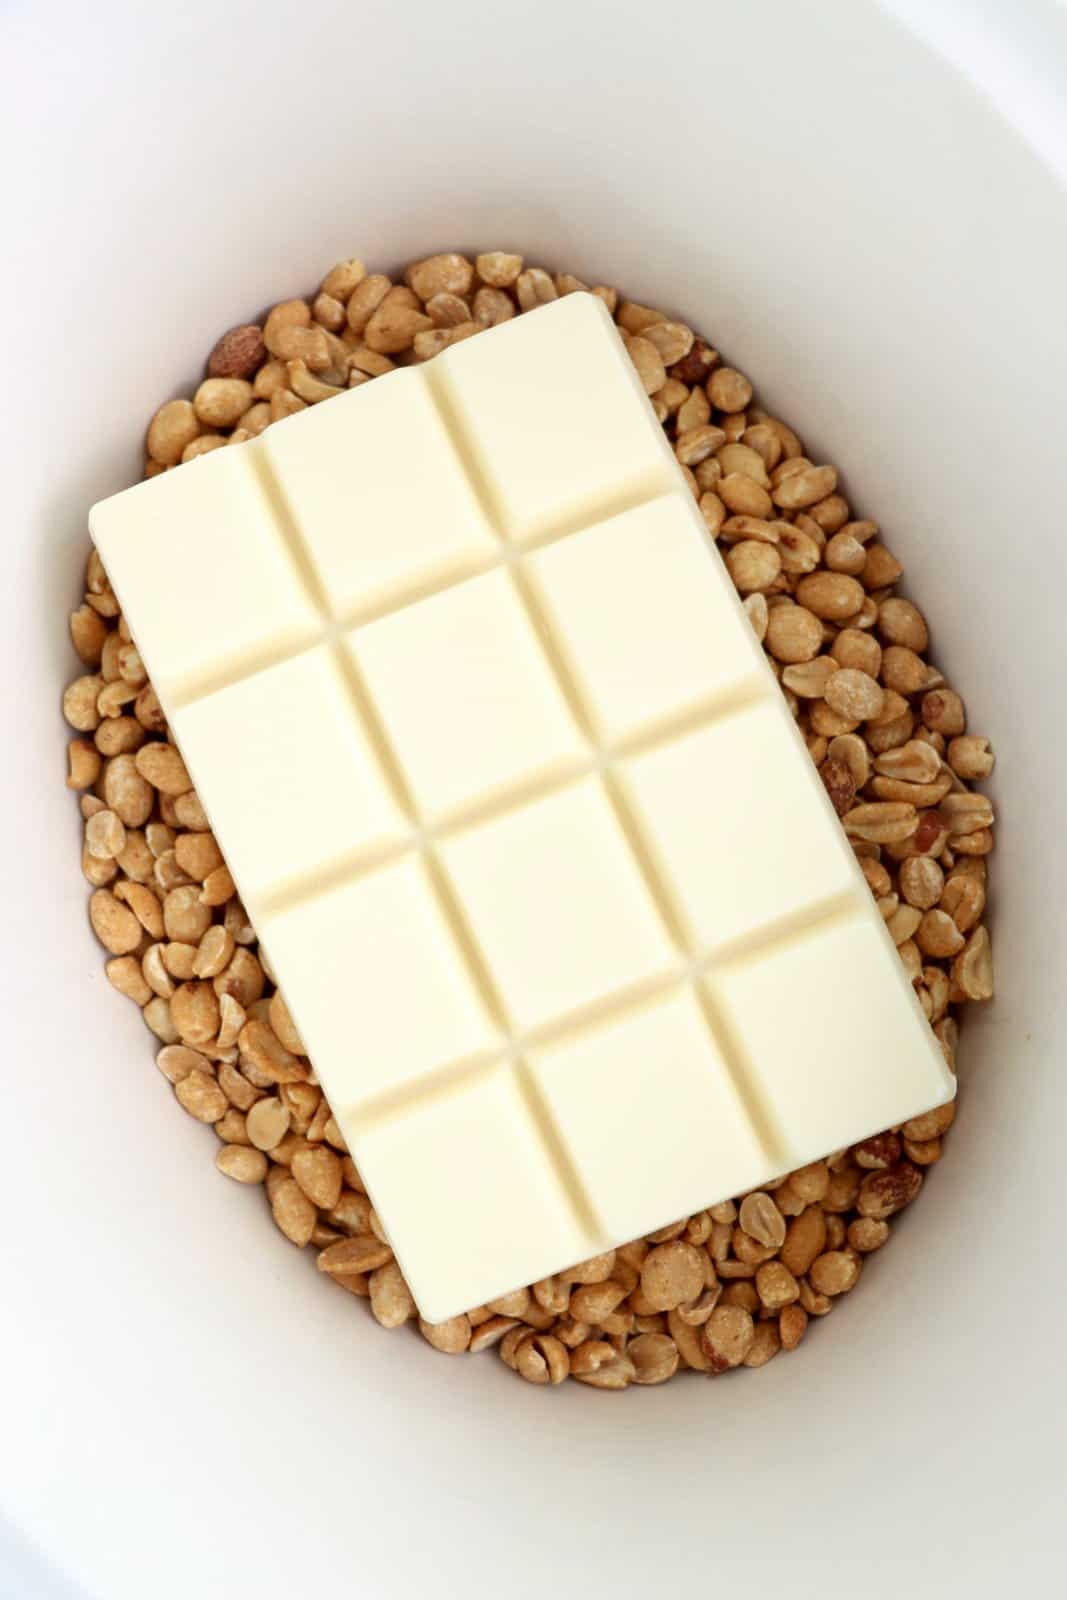 A slow cooker insert with roasted peanuts on the bottom and almond bark on top.